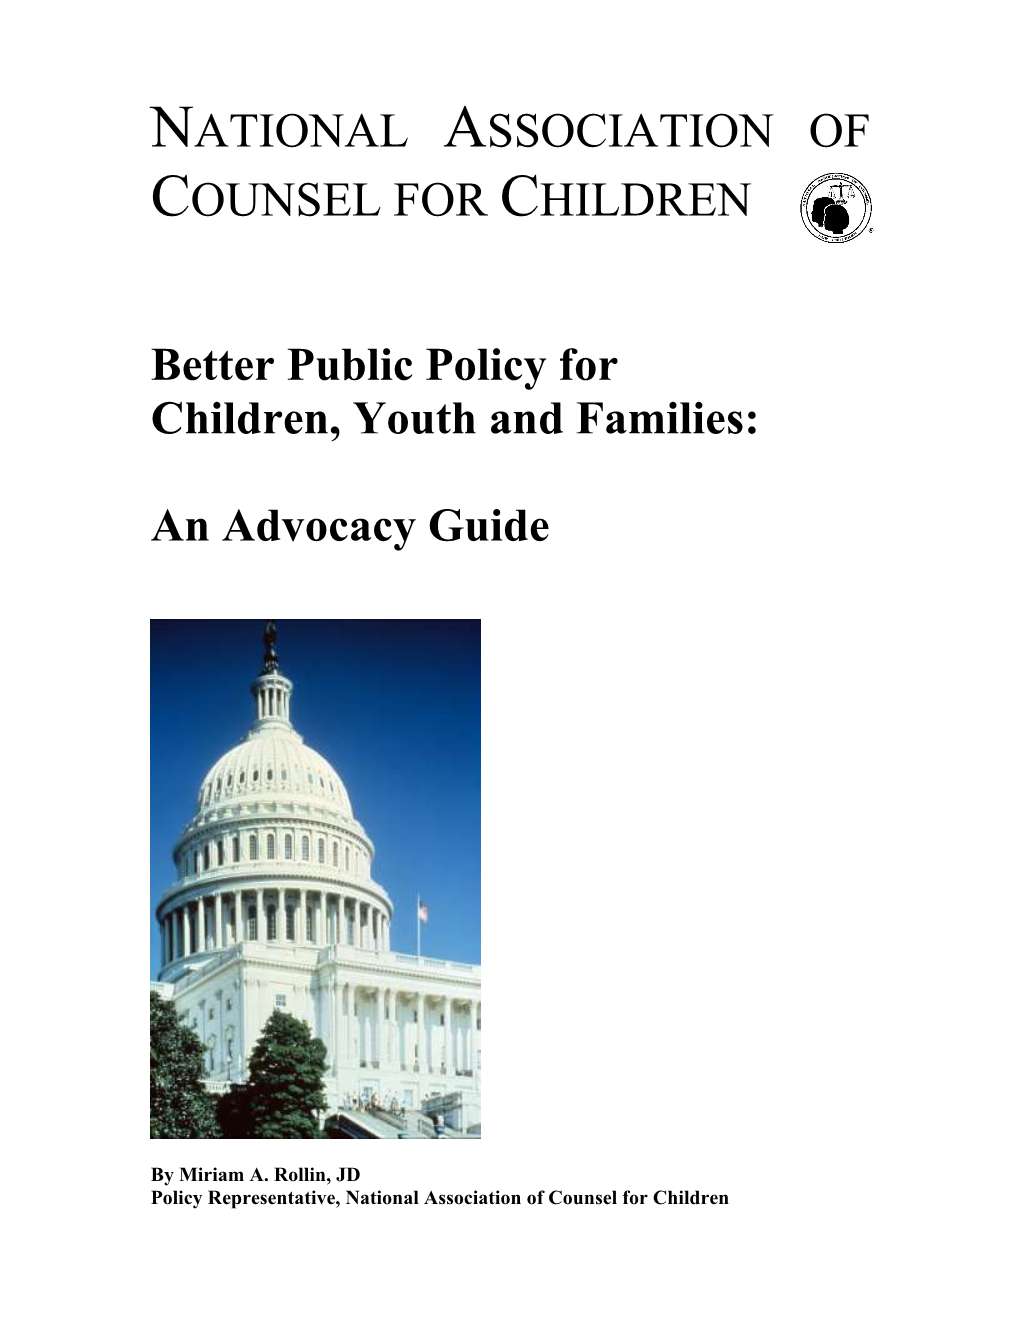 An Advocacy Guide